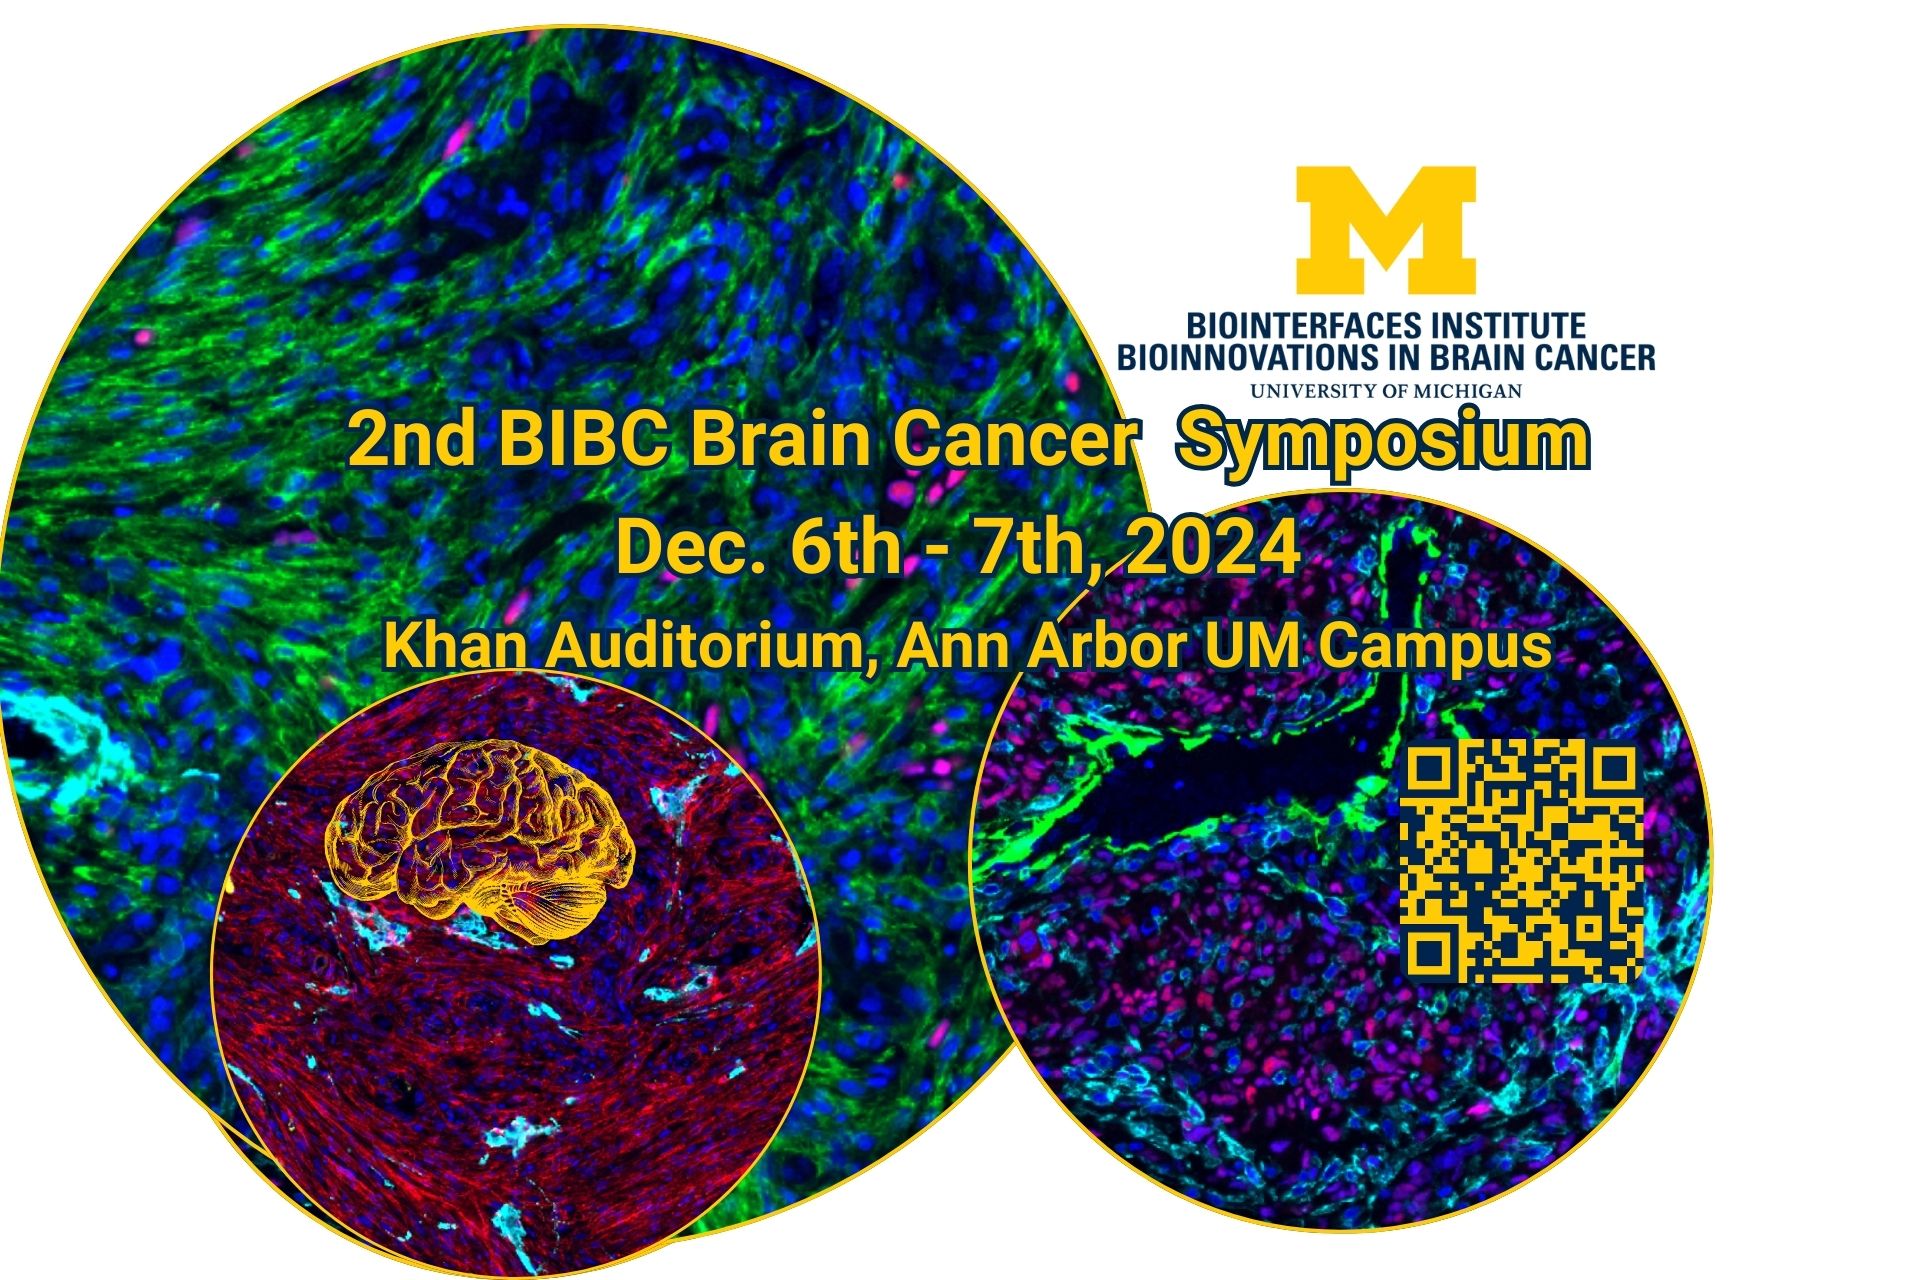 Promotional graphic for the 2nd BIBC Brain Cancer Symposium, featuring colorful brain tissue scans and event details. December 6th-7th 2024, Khan Auditorium, Ann Arbor UM Campus